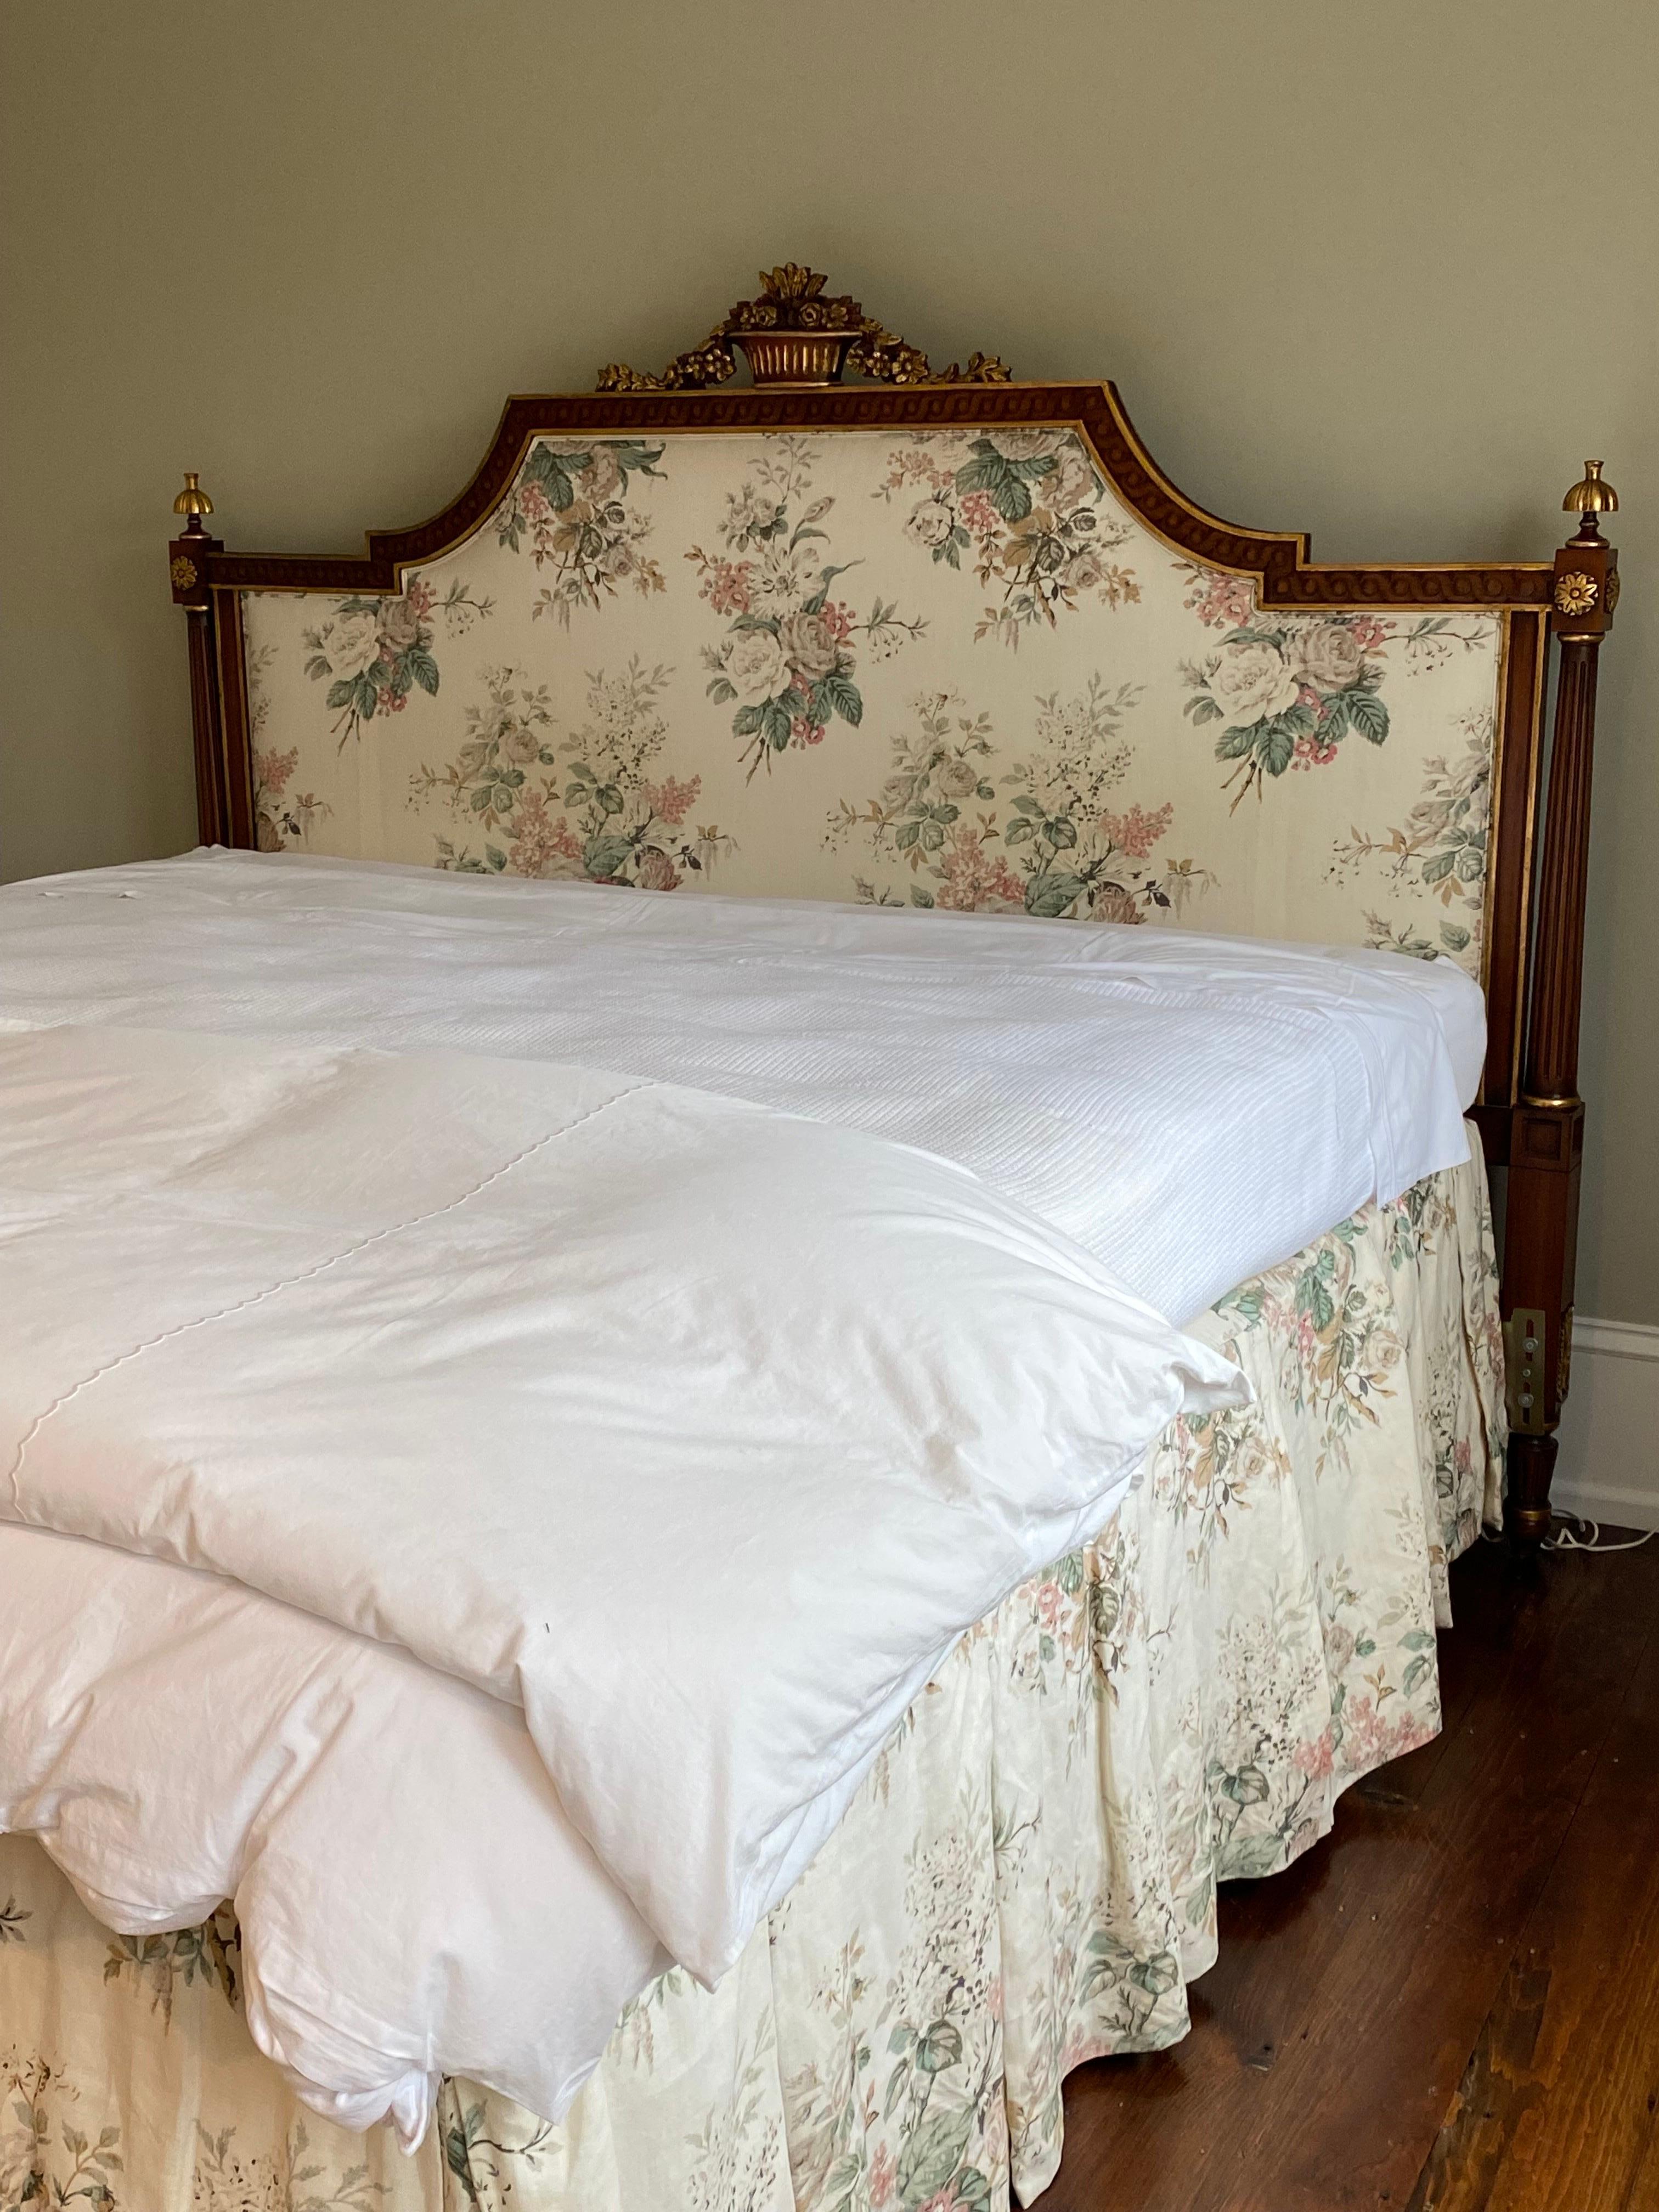 Julia gray neoclassical style king size headboard
A truly lovely king size bed frame in mahogany. Egg & dart banding with gilded central basket, edges, rosettes and carved finials. Upholstered in a classic pink and grey floral cotton/linen fabric